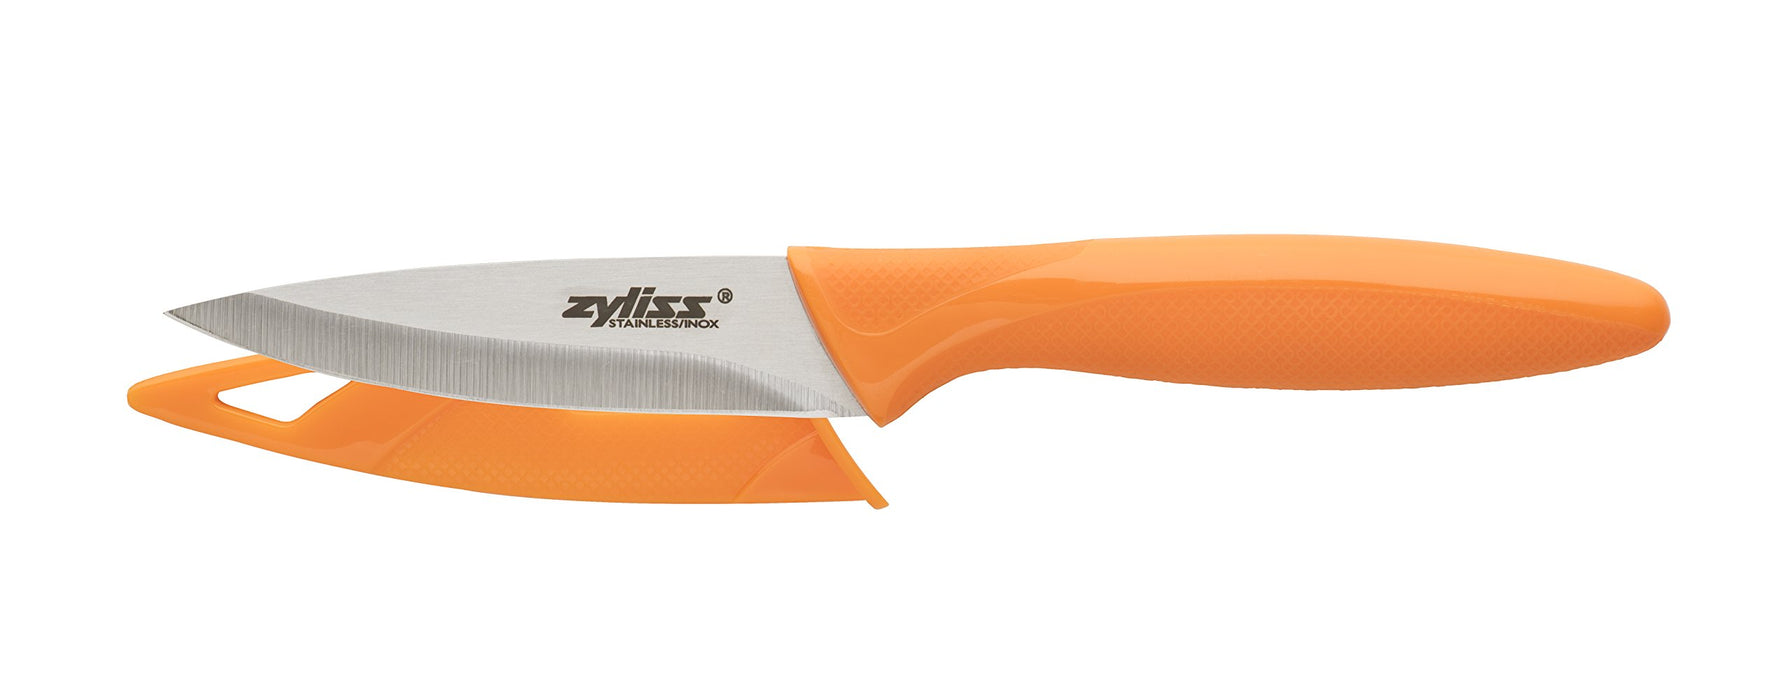 Zyliss Utility Paring Kitchen Knife with Sheath Cover - Stainless